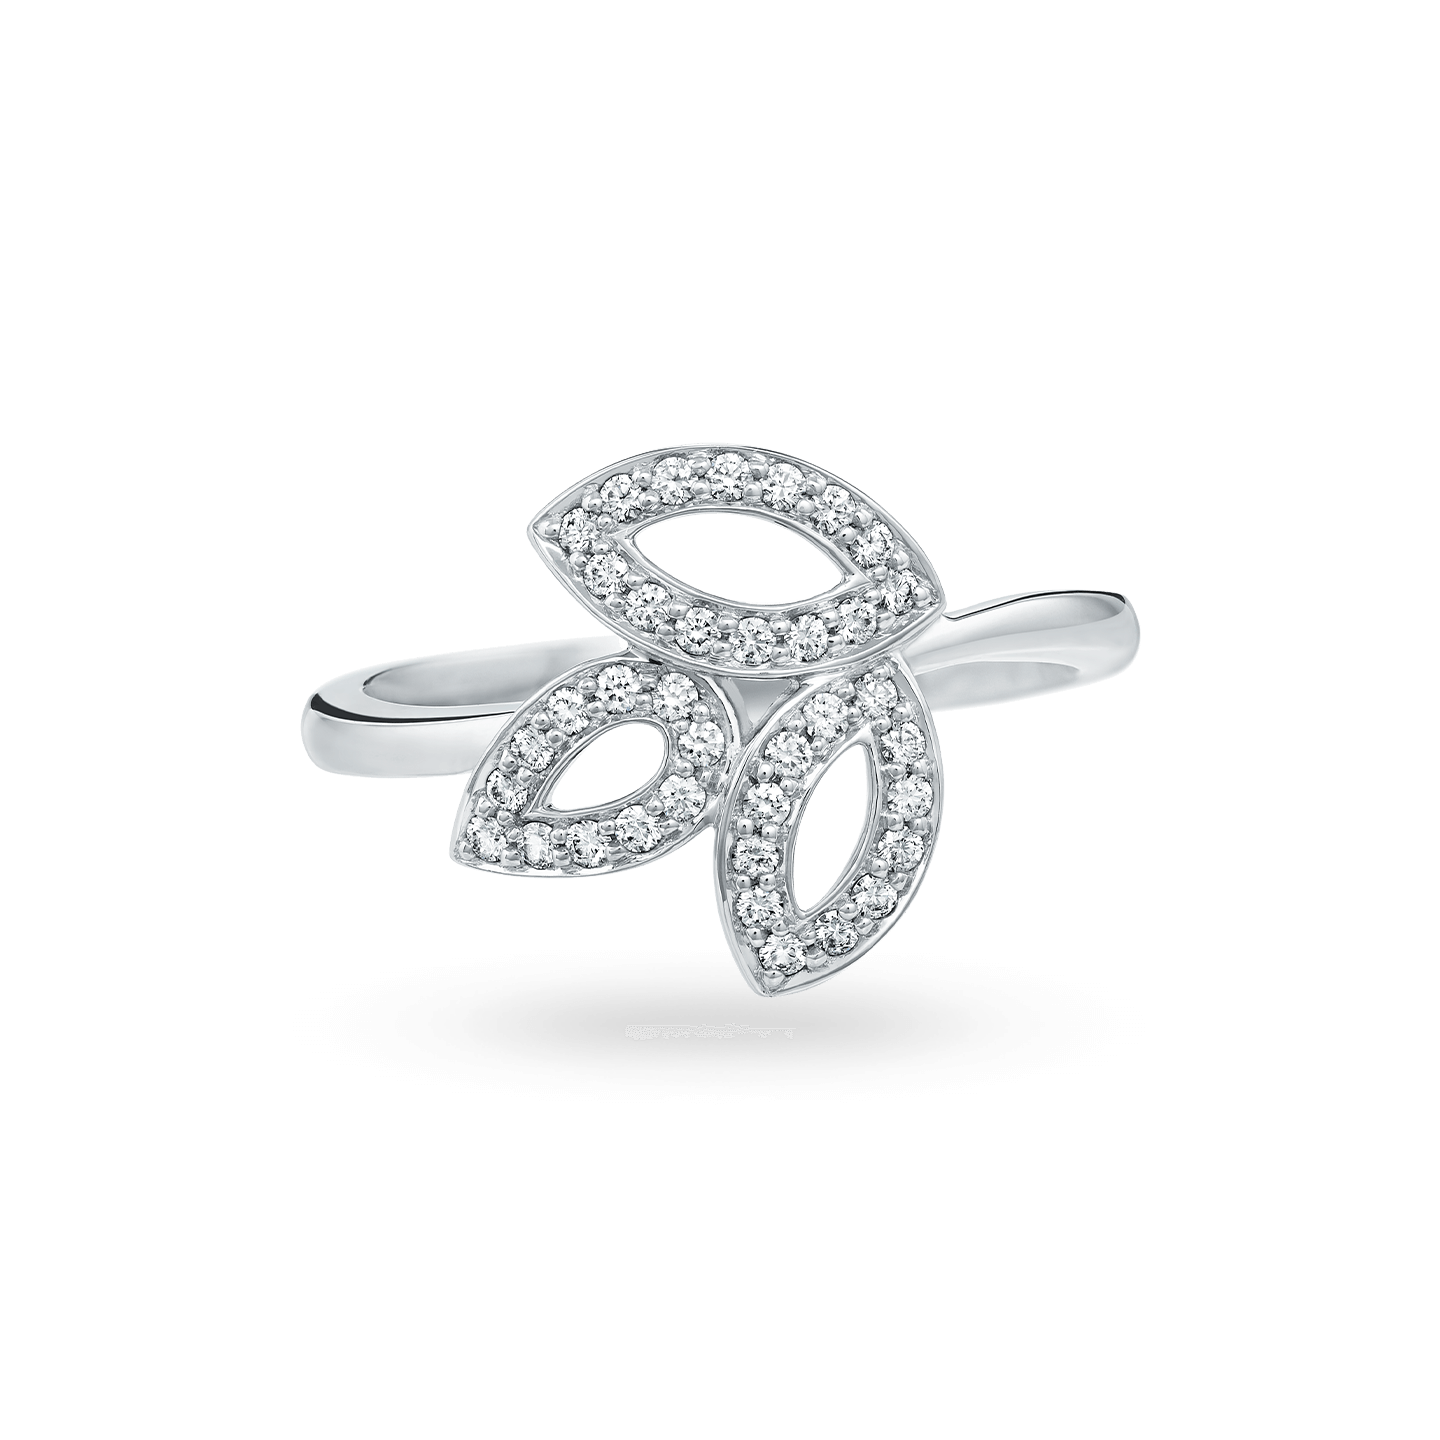 Lily Cluster Diamond Ring in Platinum, Product Image 1